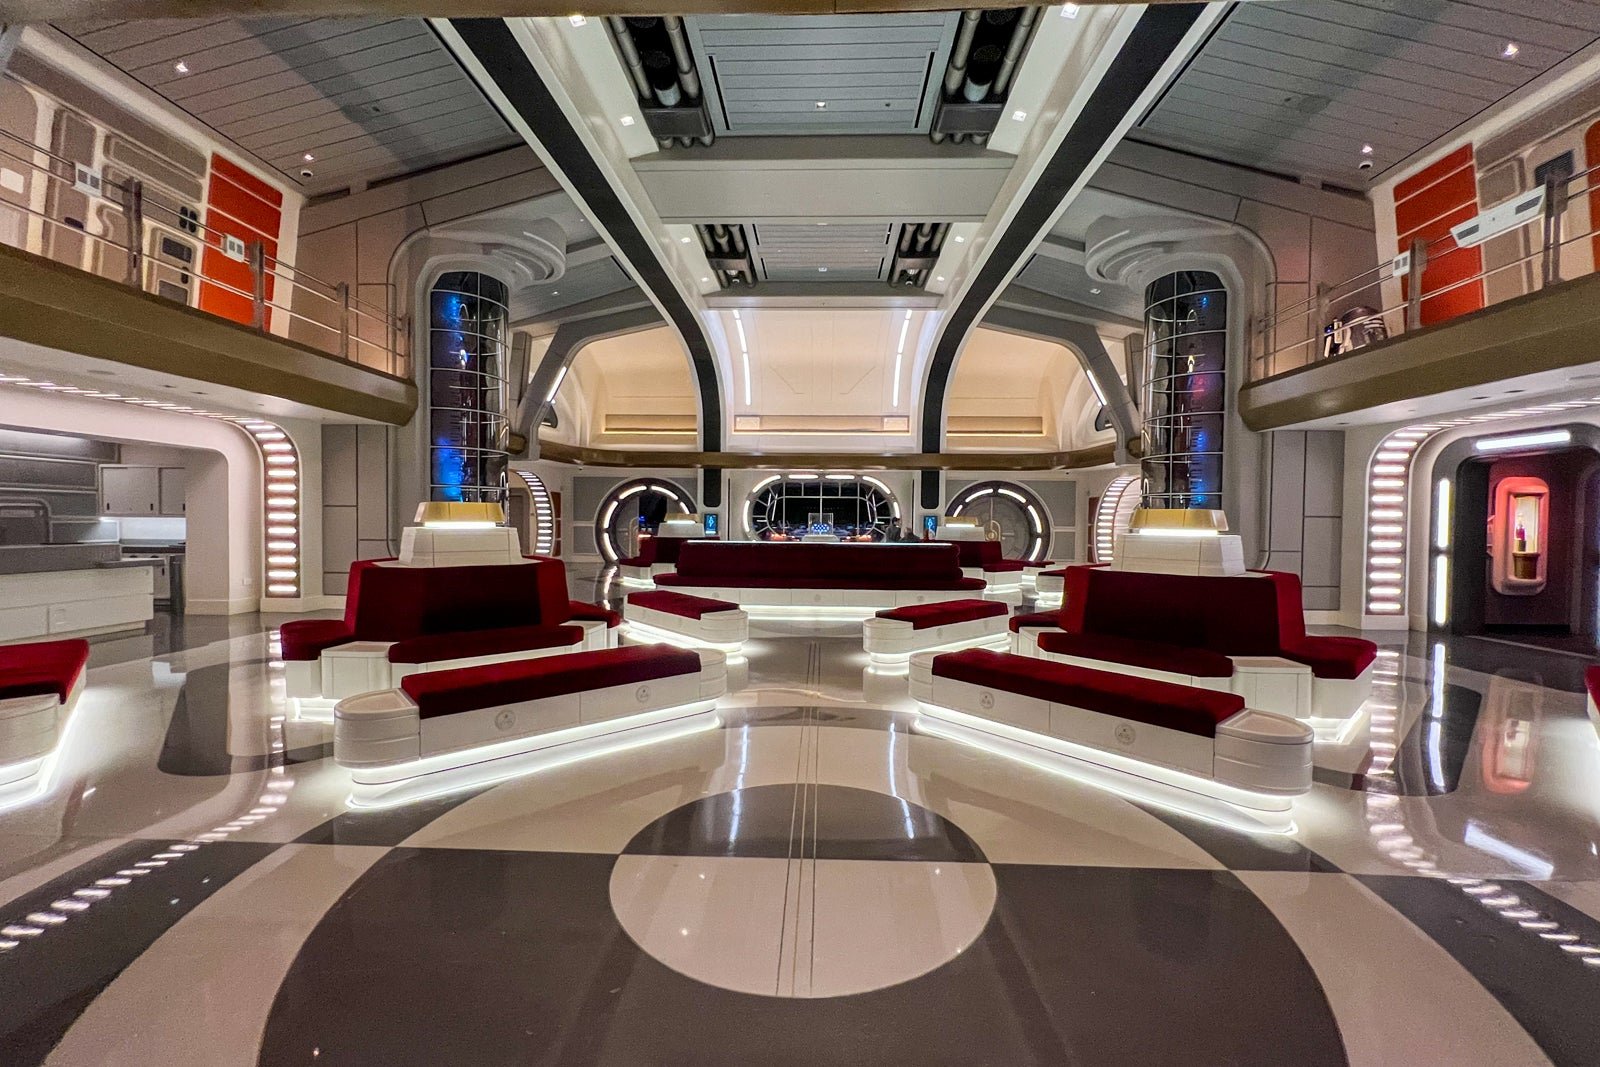 Is the new Star Wars: Galactic Starcruiser ‘hotel’ worth it? We paid $6,875 to find out